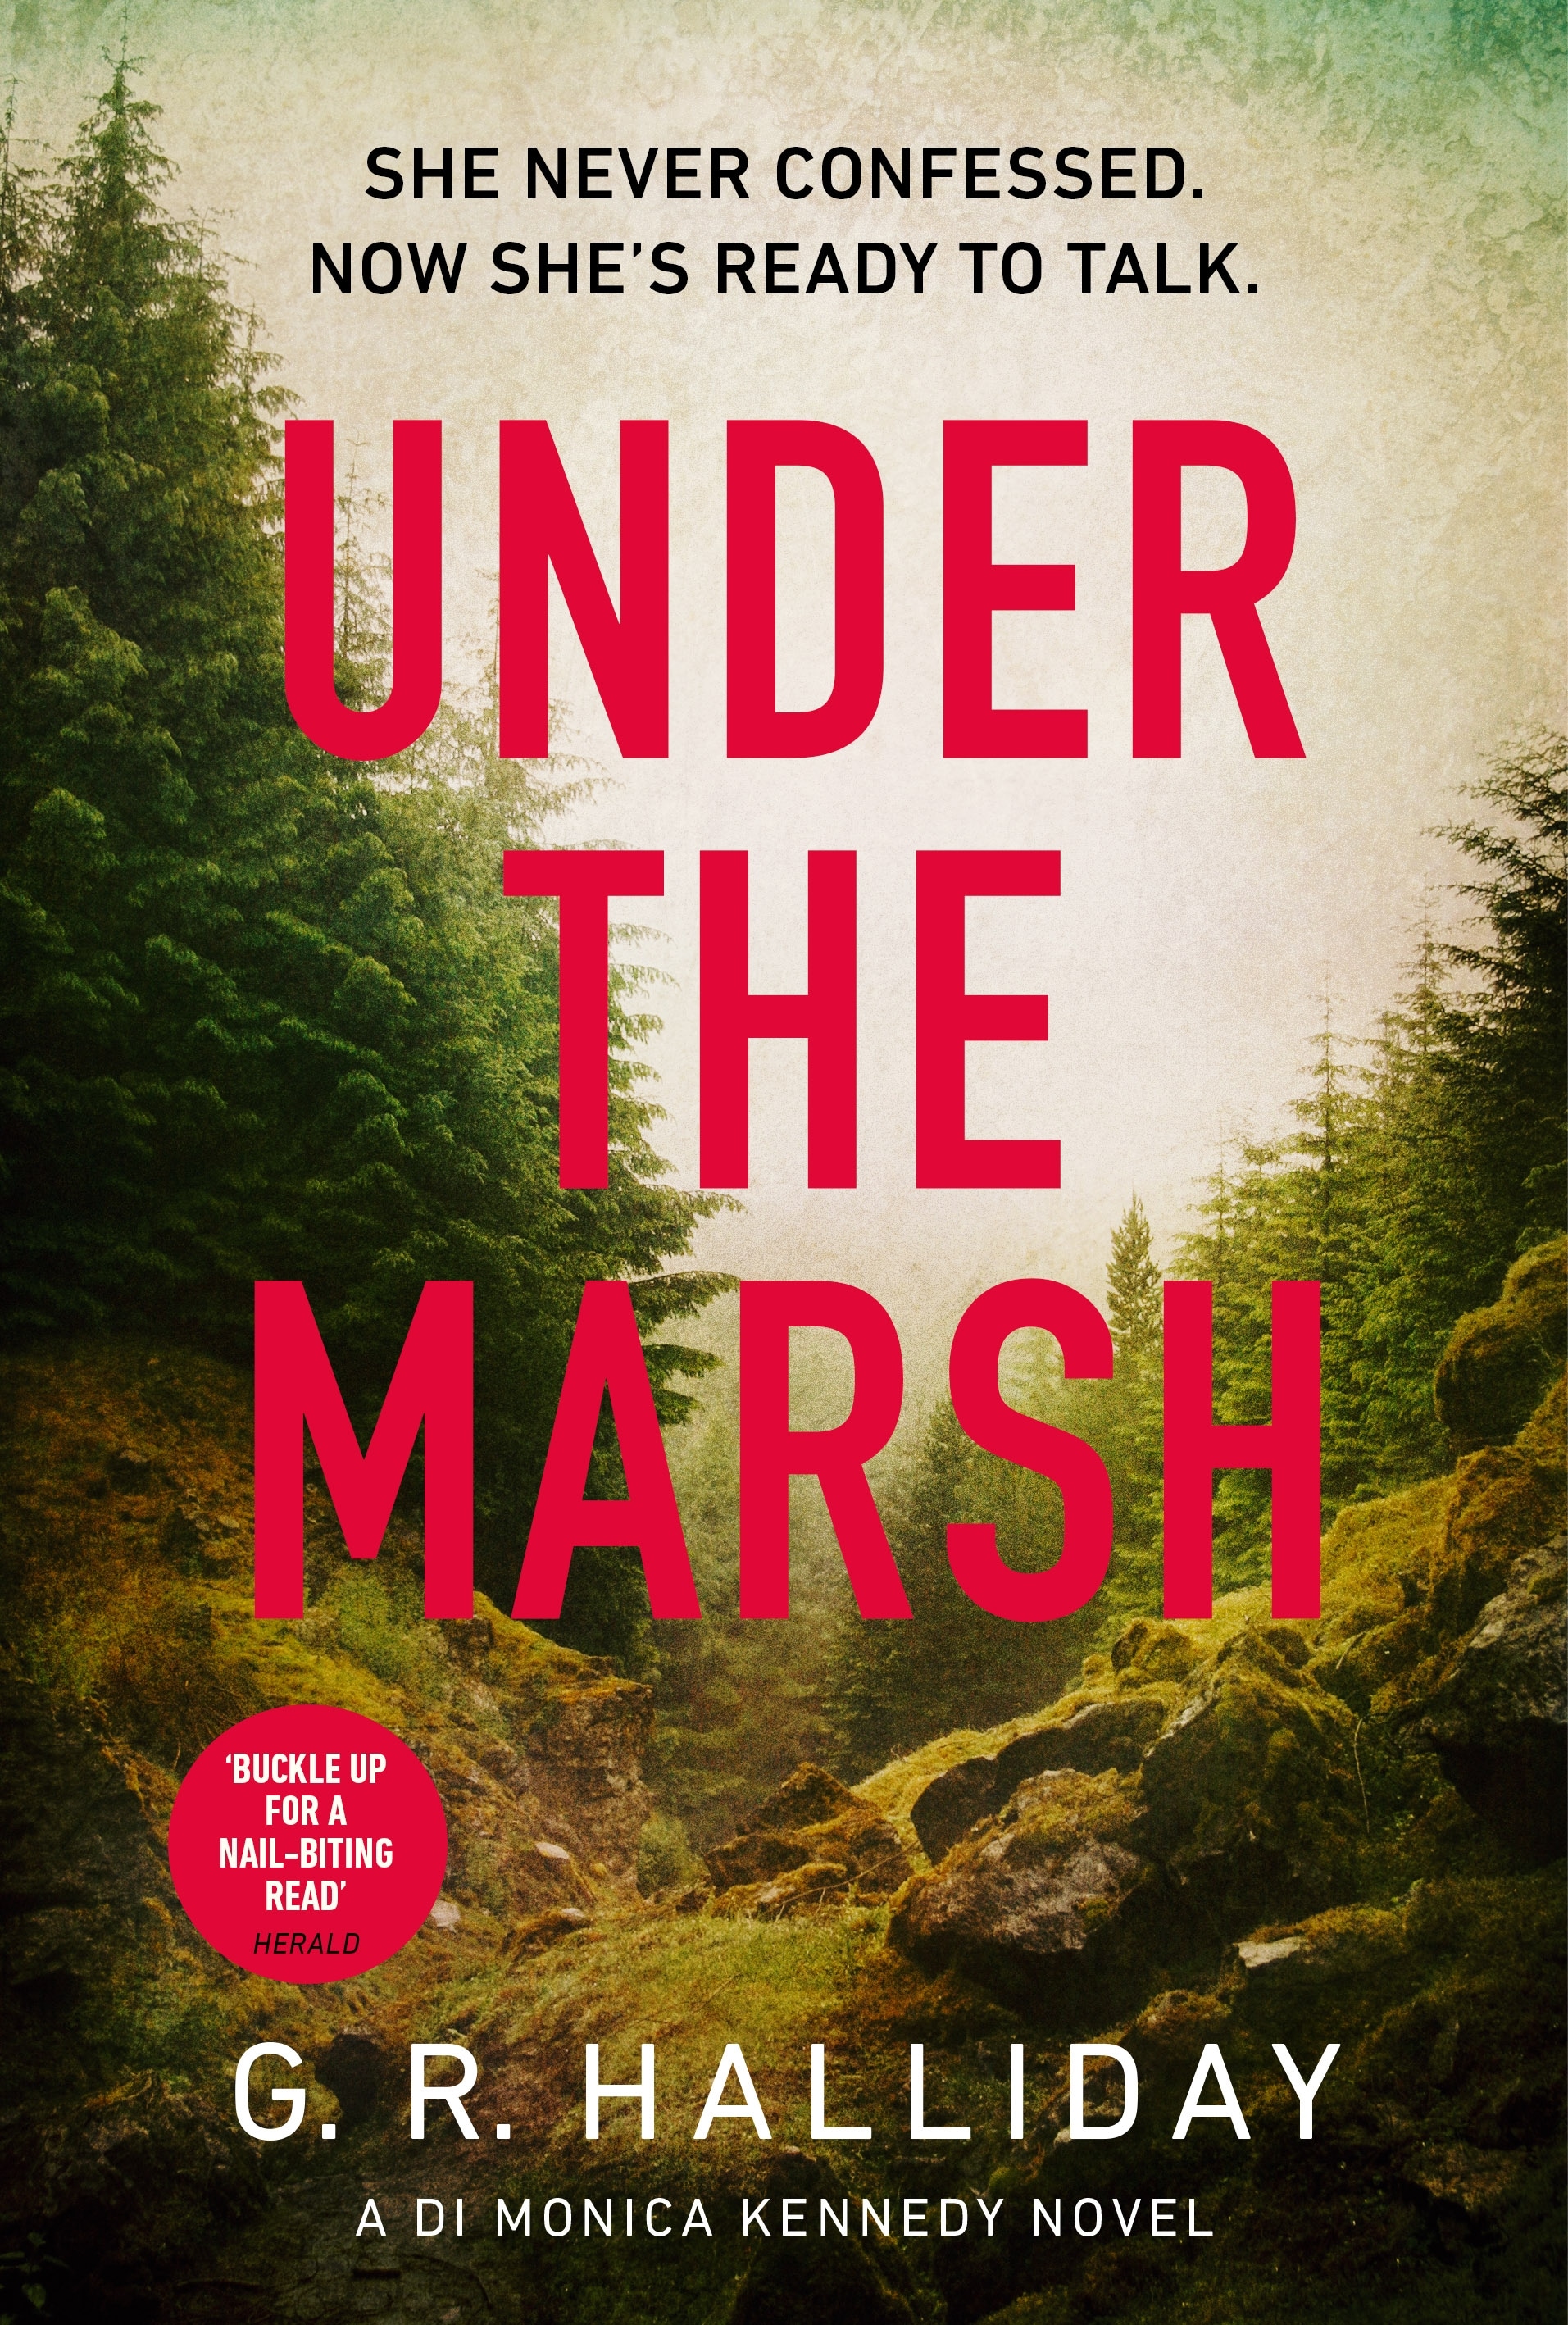 Book “Under the Marsh” by G. R. Halliday — July 21, 2022